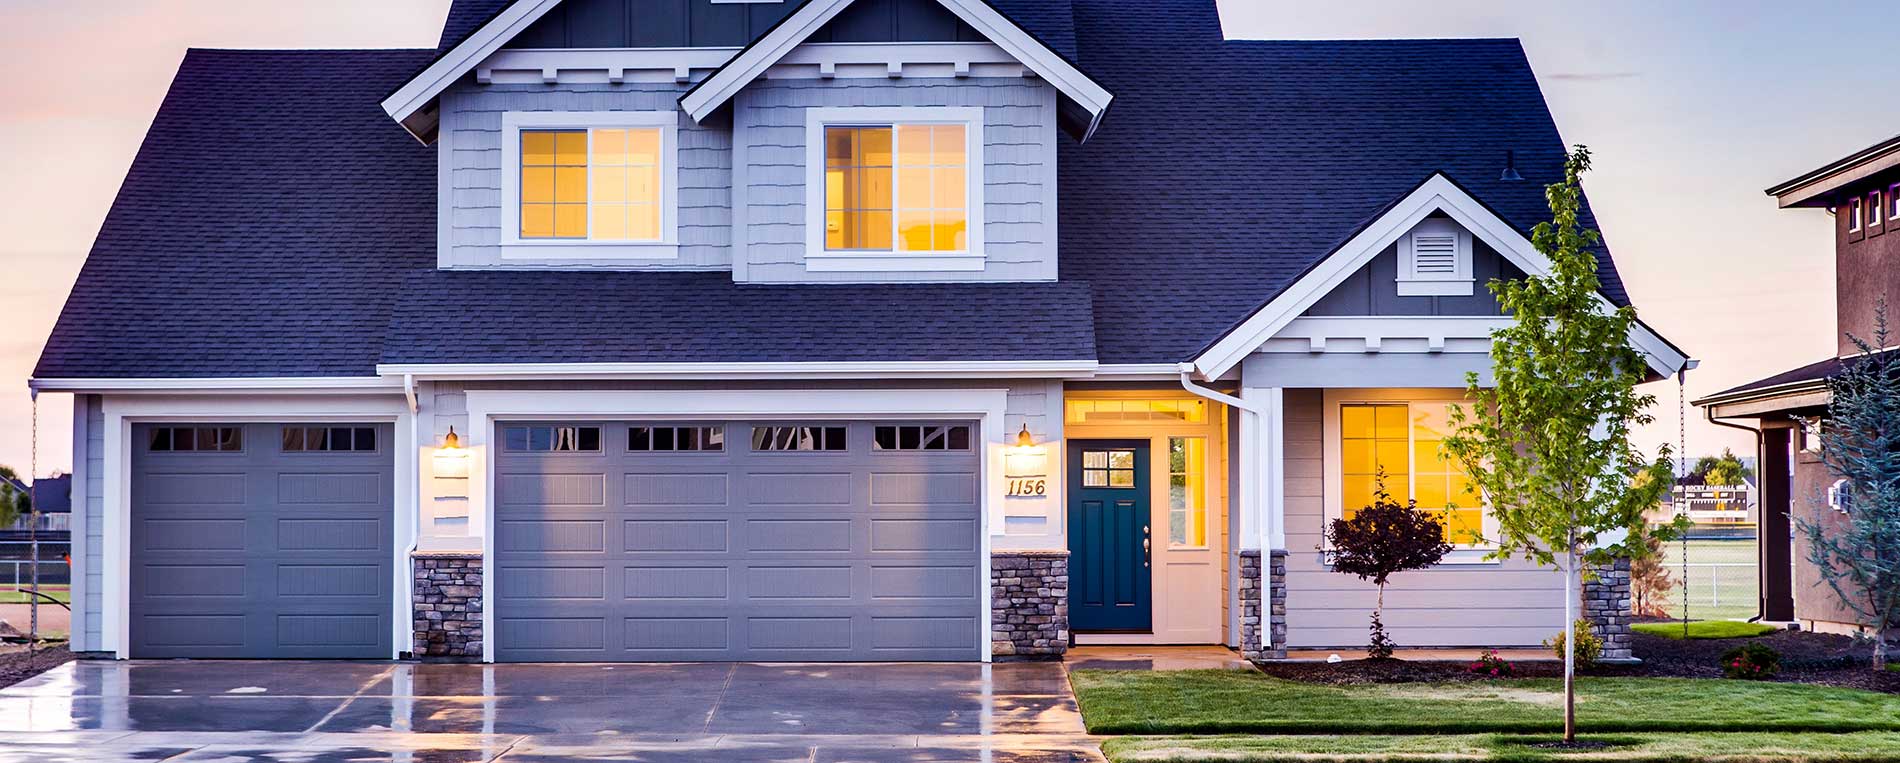 What You Need to Know About Buying a New Garage Door Opener